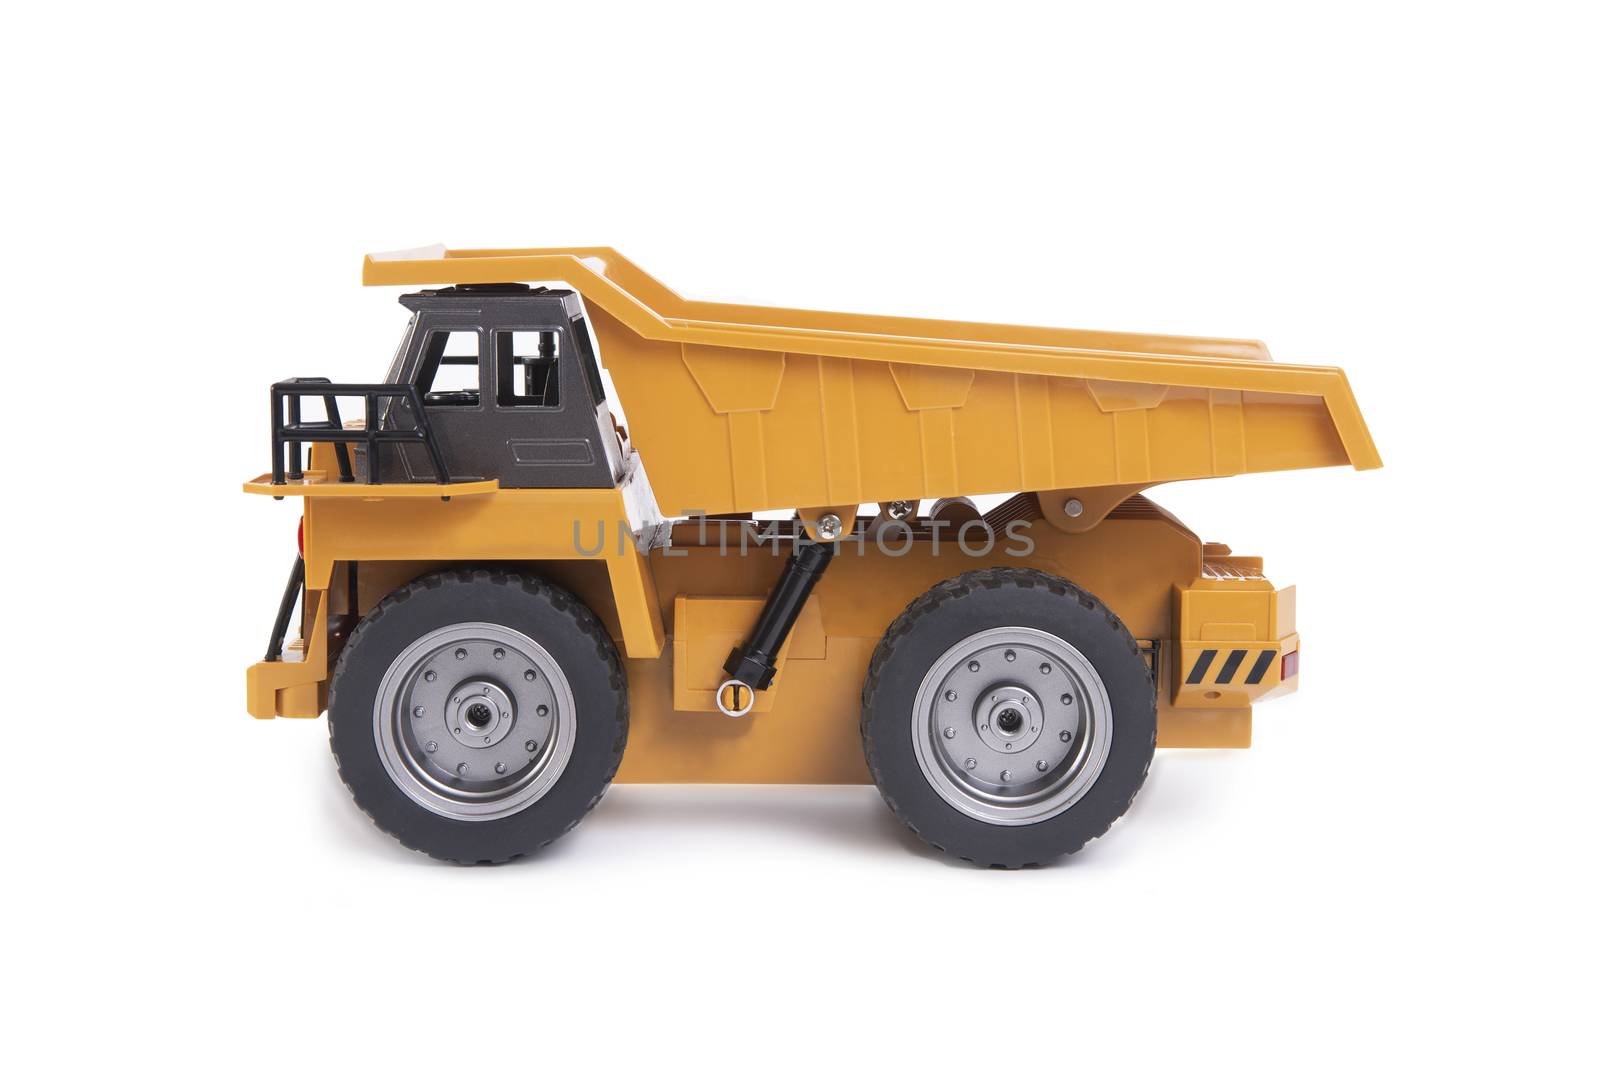 Side view of yellow truck toy model on white background.